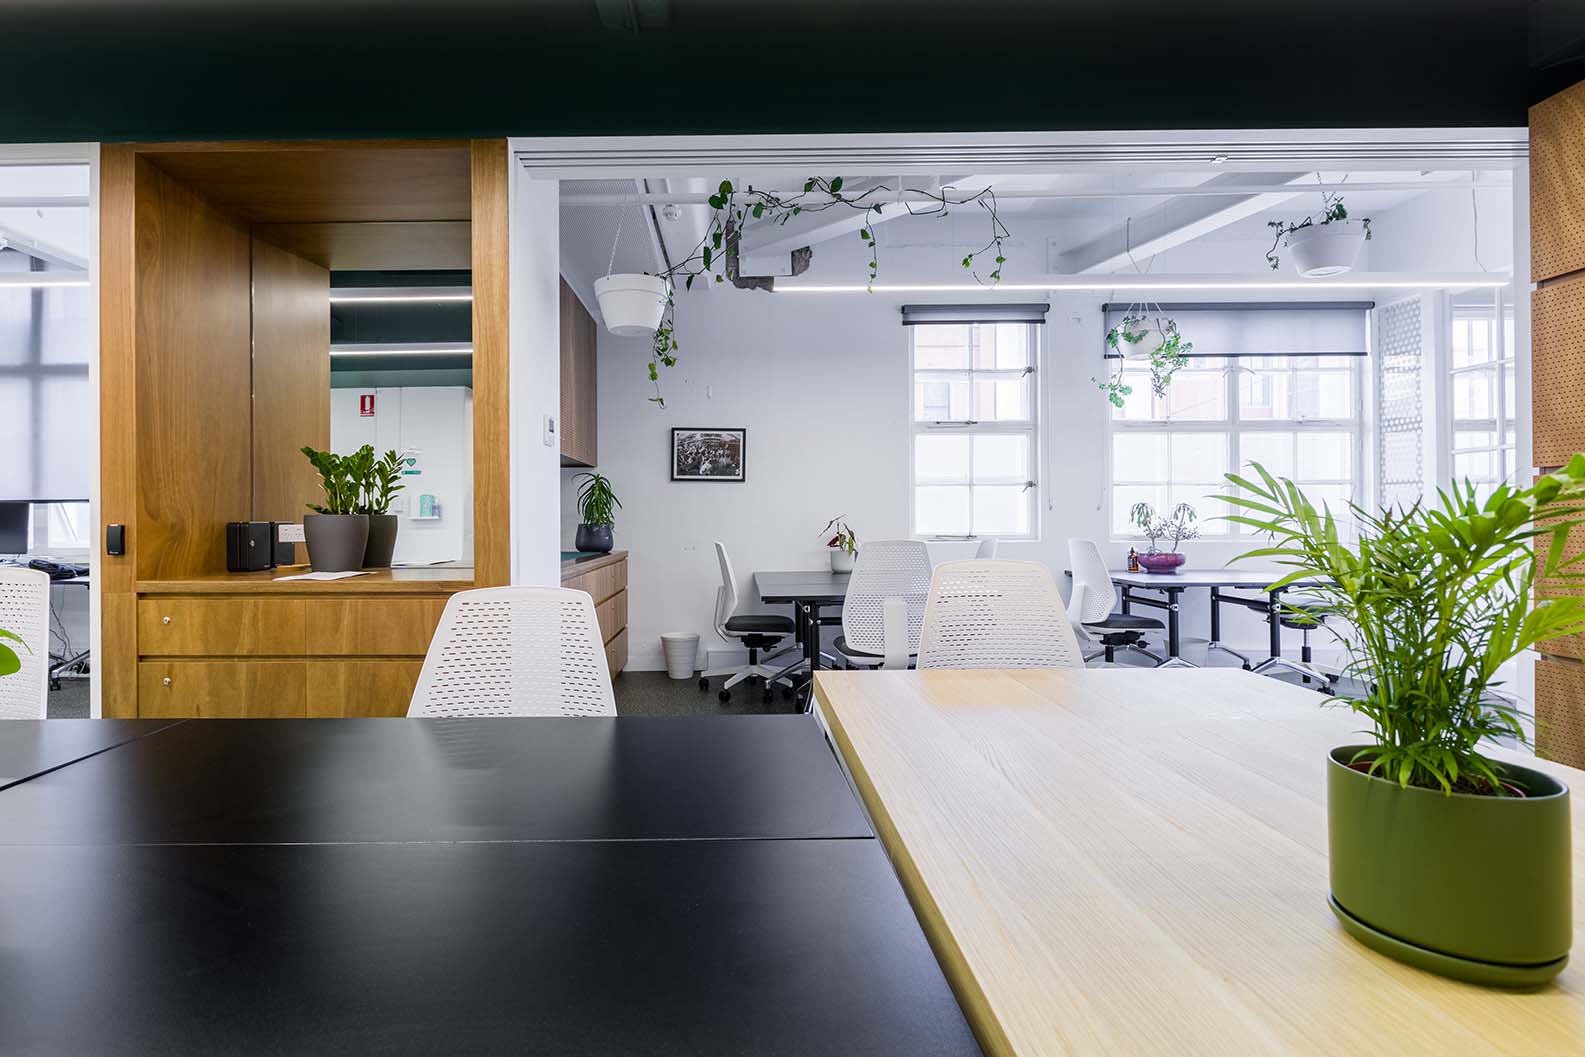 Bright co-work space with black desks, wooden desks, white chairs and plants on tables.